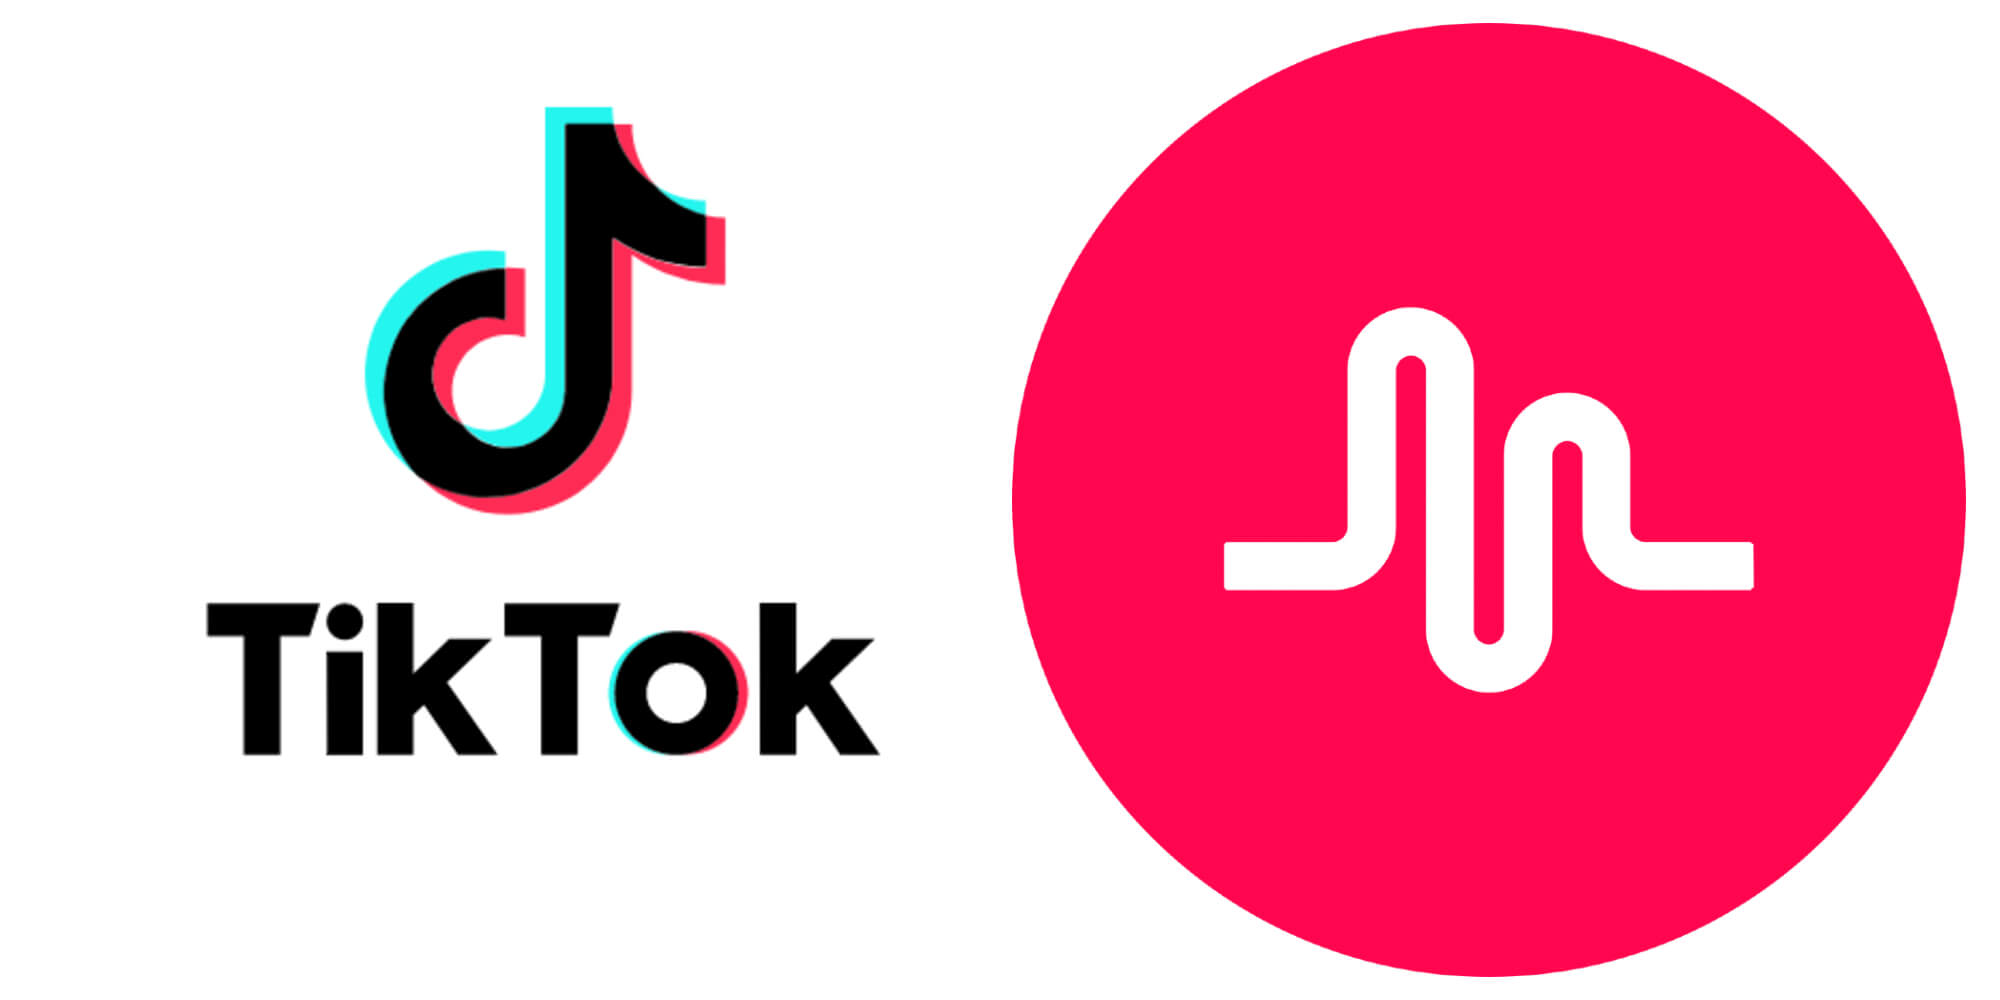 Is TikTok Musical.ly?